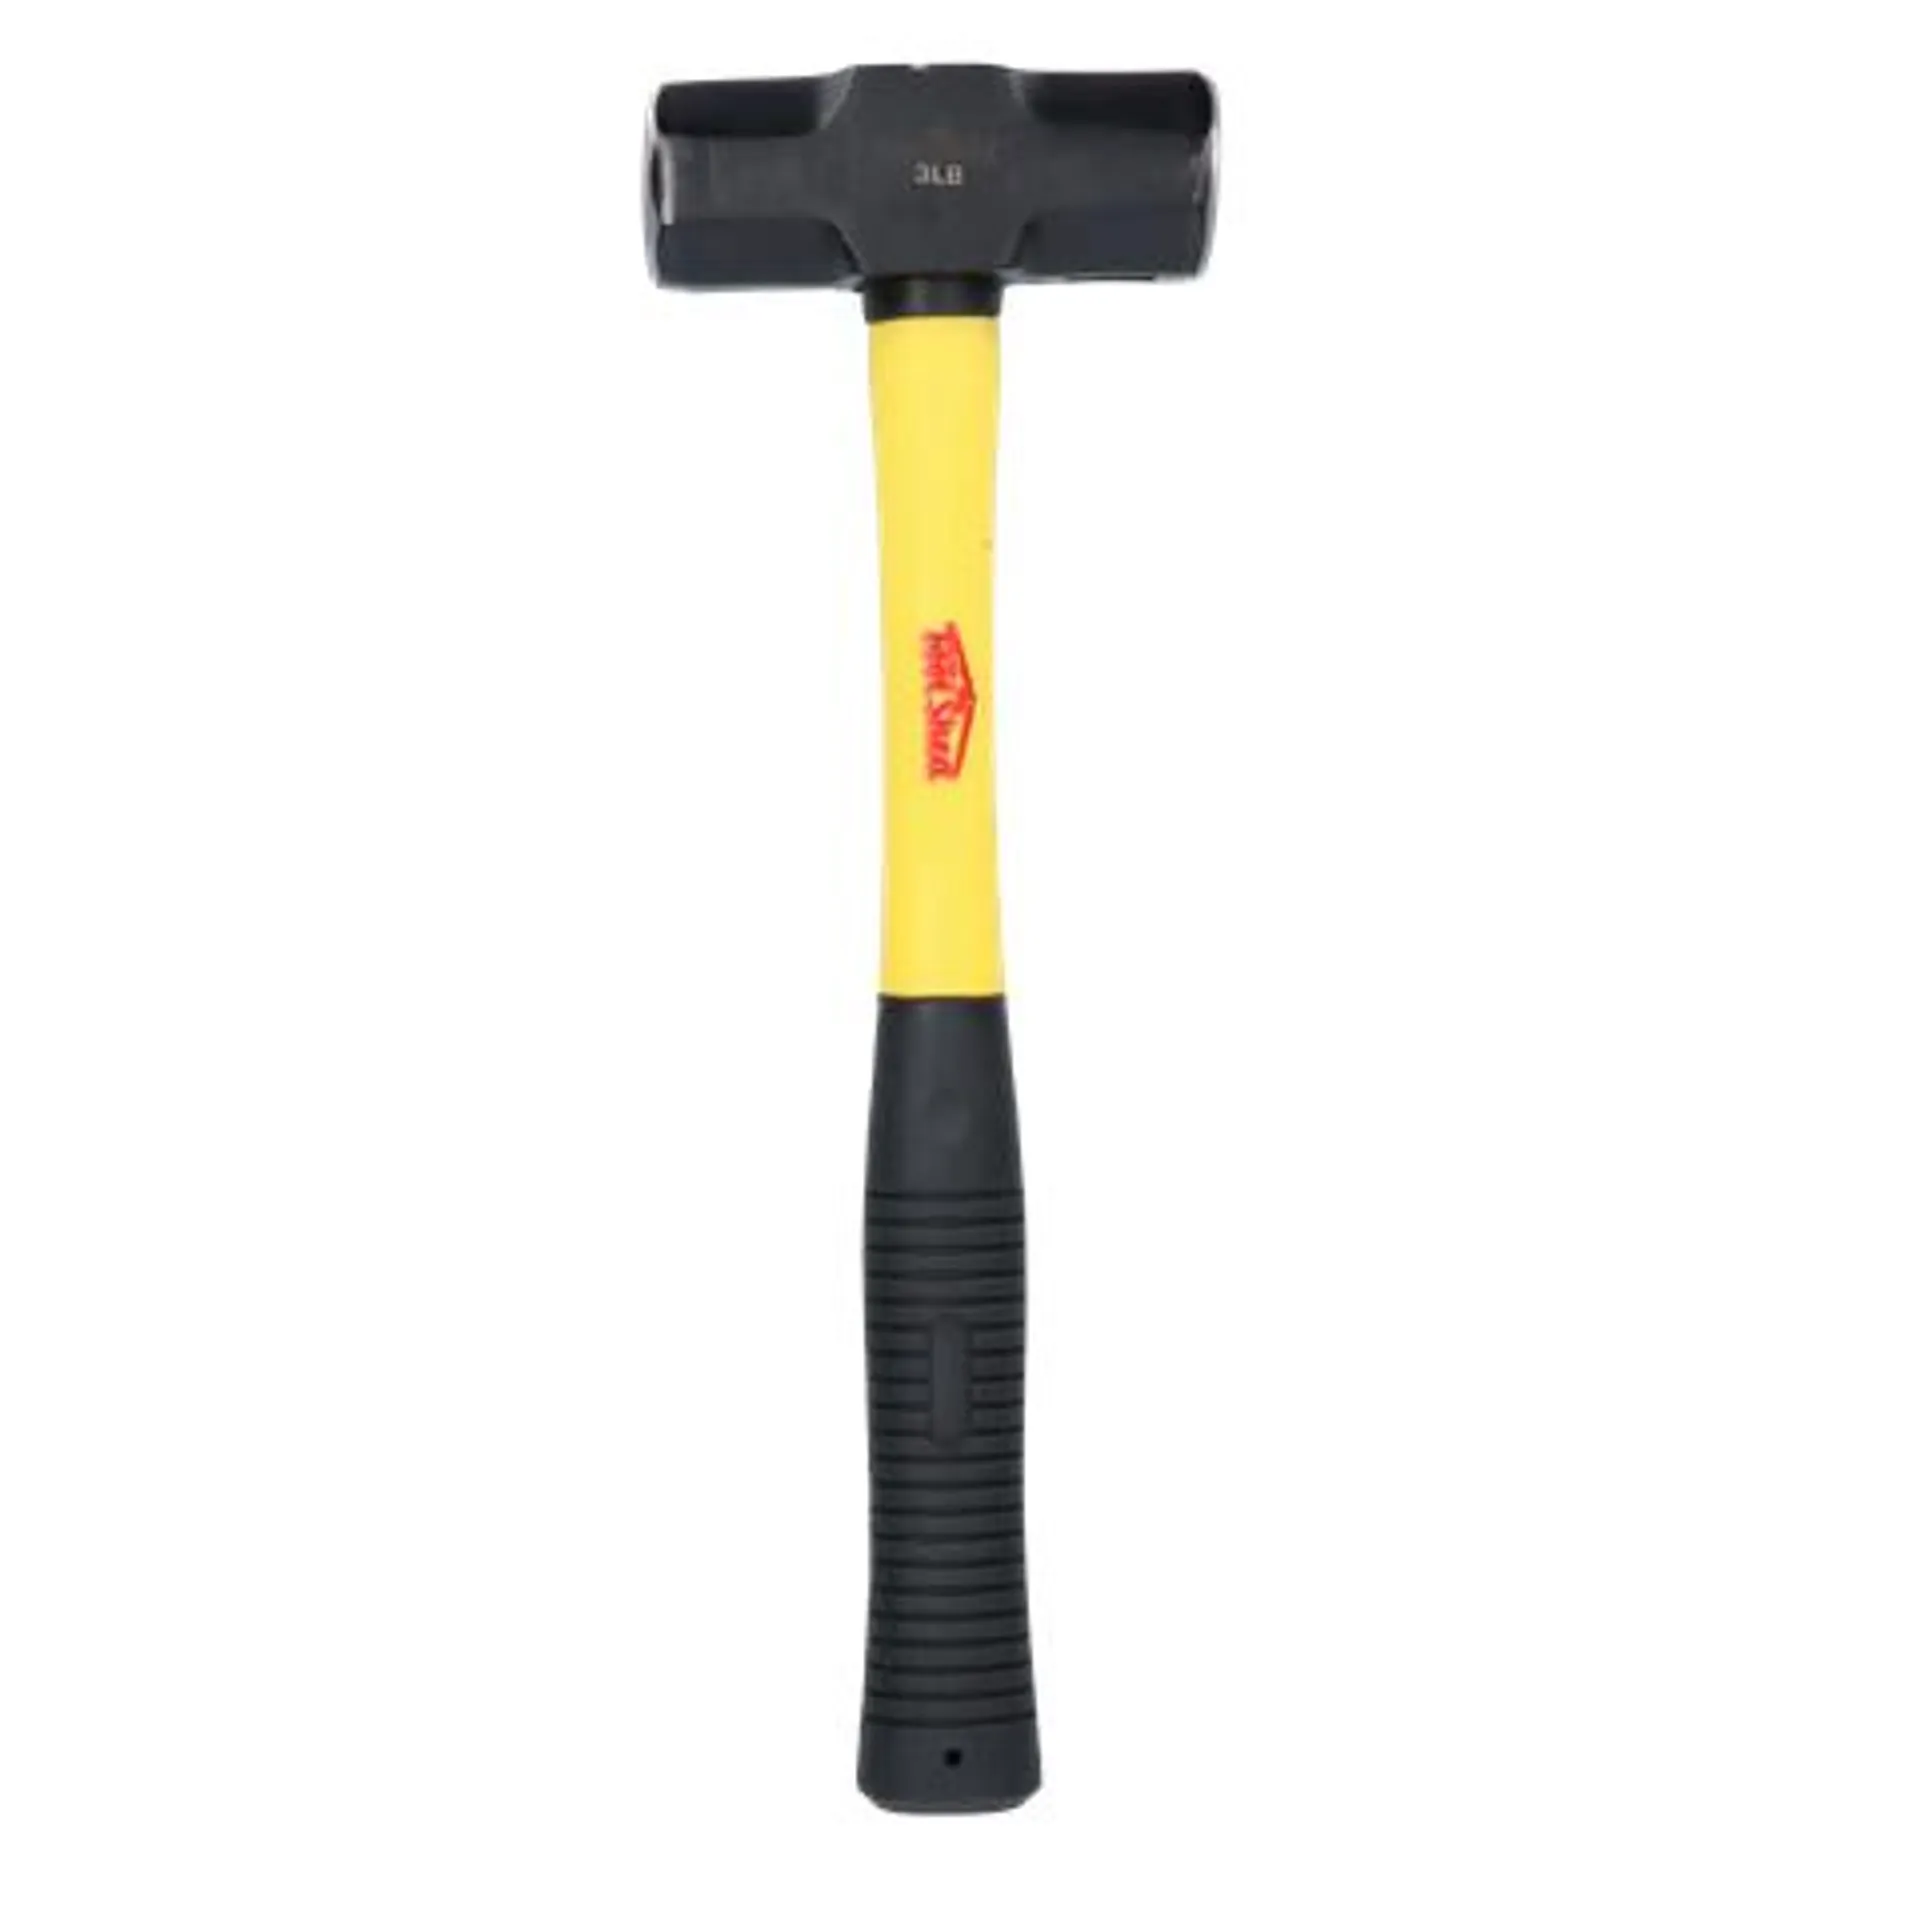 ToolShed Sledge Hammer 3lb